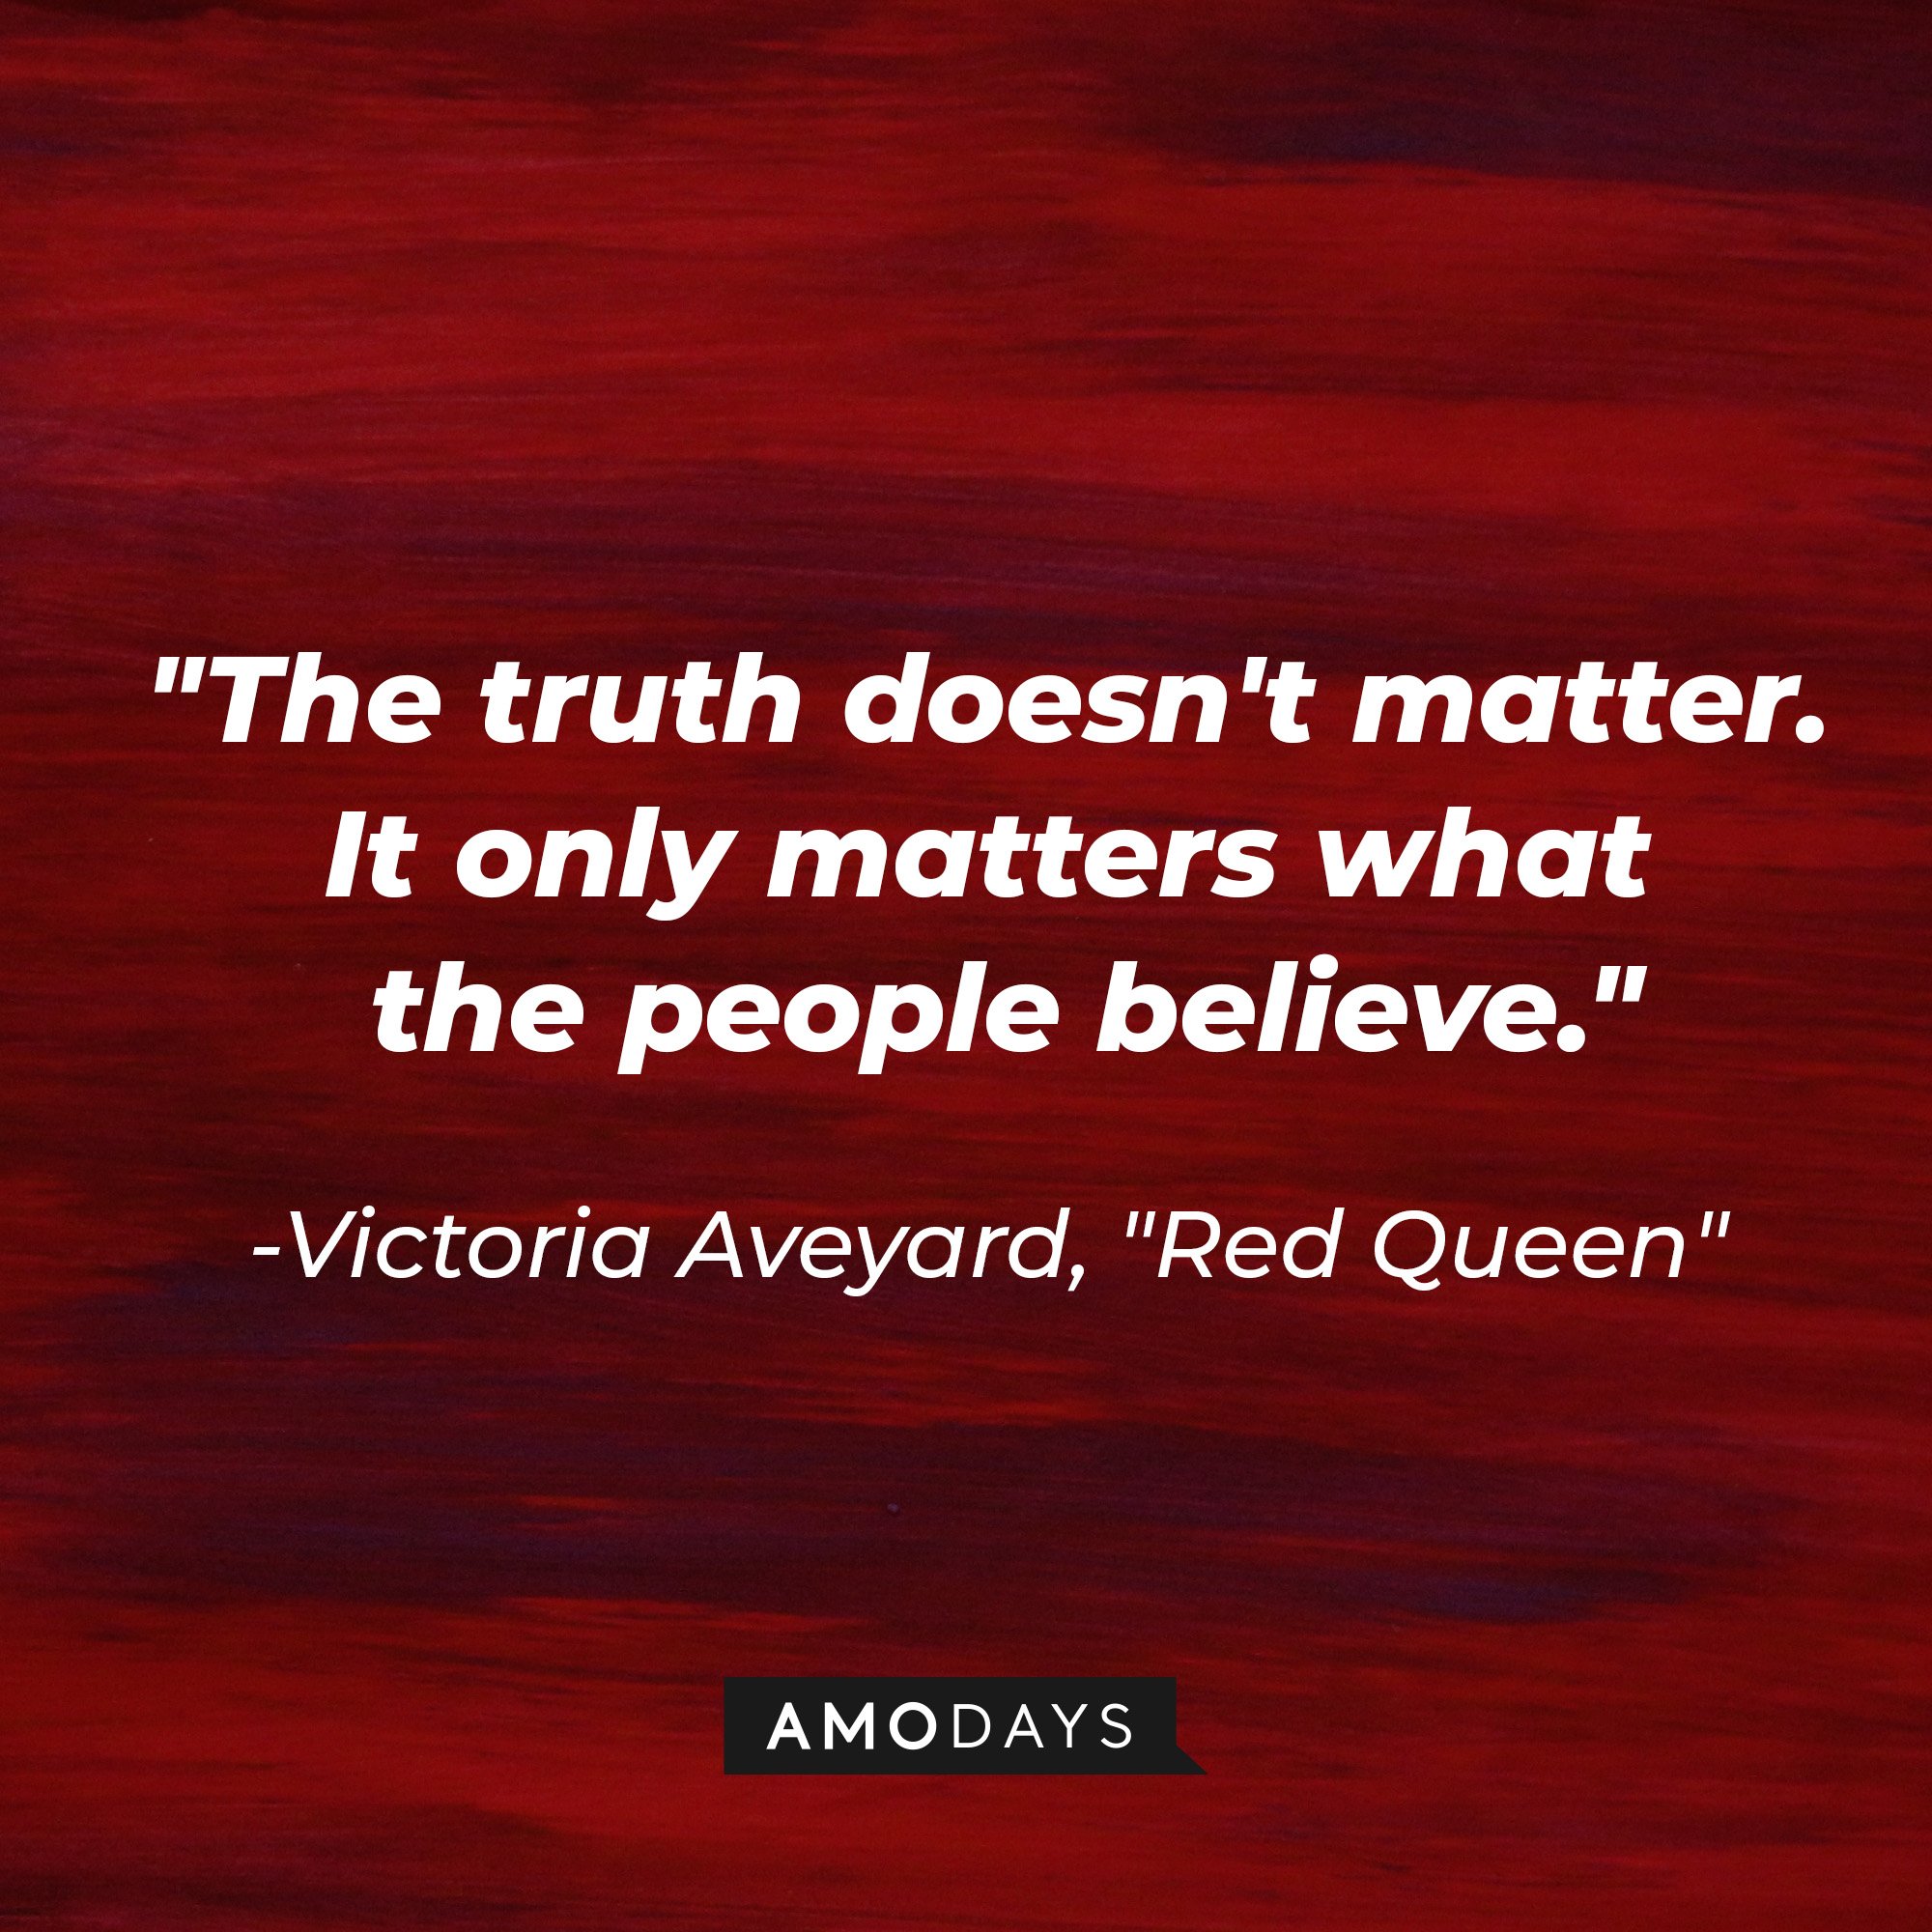  Victoria Aveyard’s quote in “Red Queen”: "The truth doesn't matter. It only matters what the people believe." | Image: AmoDays